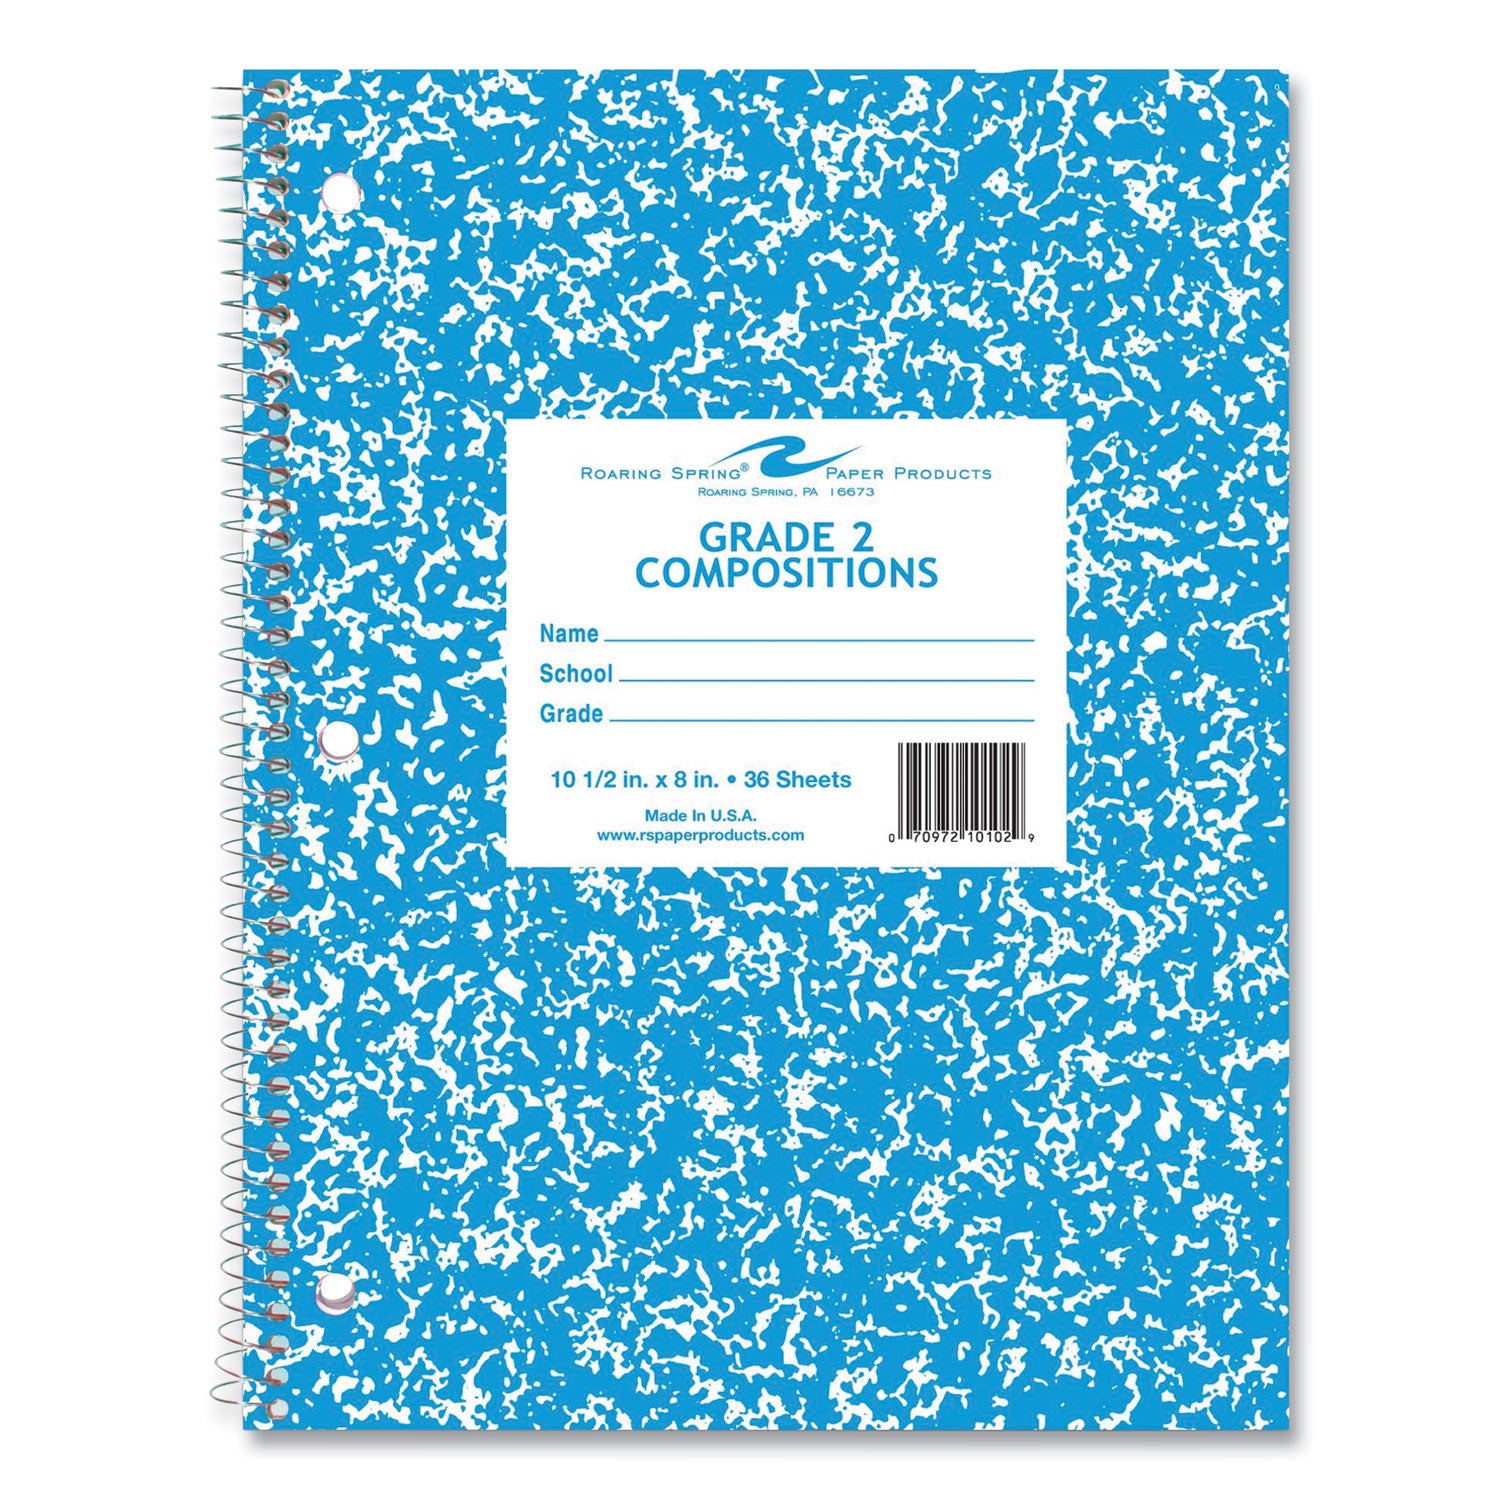 wirebound-notebook-grade-2-manuscript-format-blue-marble-cover-36-105-x-8-sheets-48-ct-ships-in-4-6-business-days_roa10102cs - 2